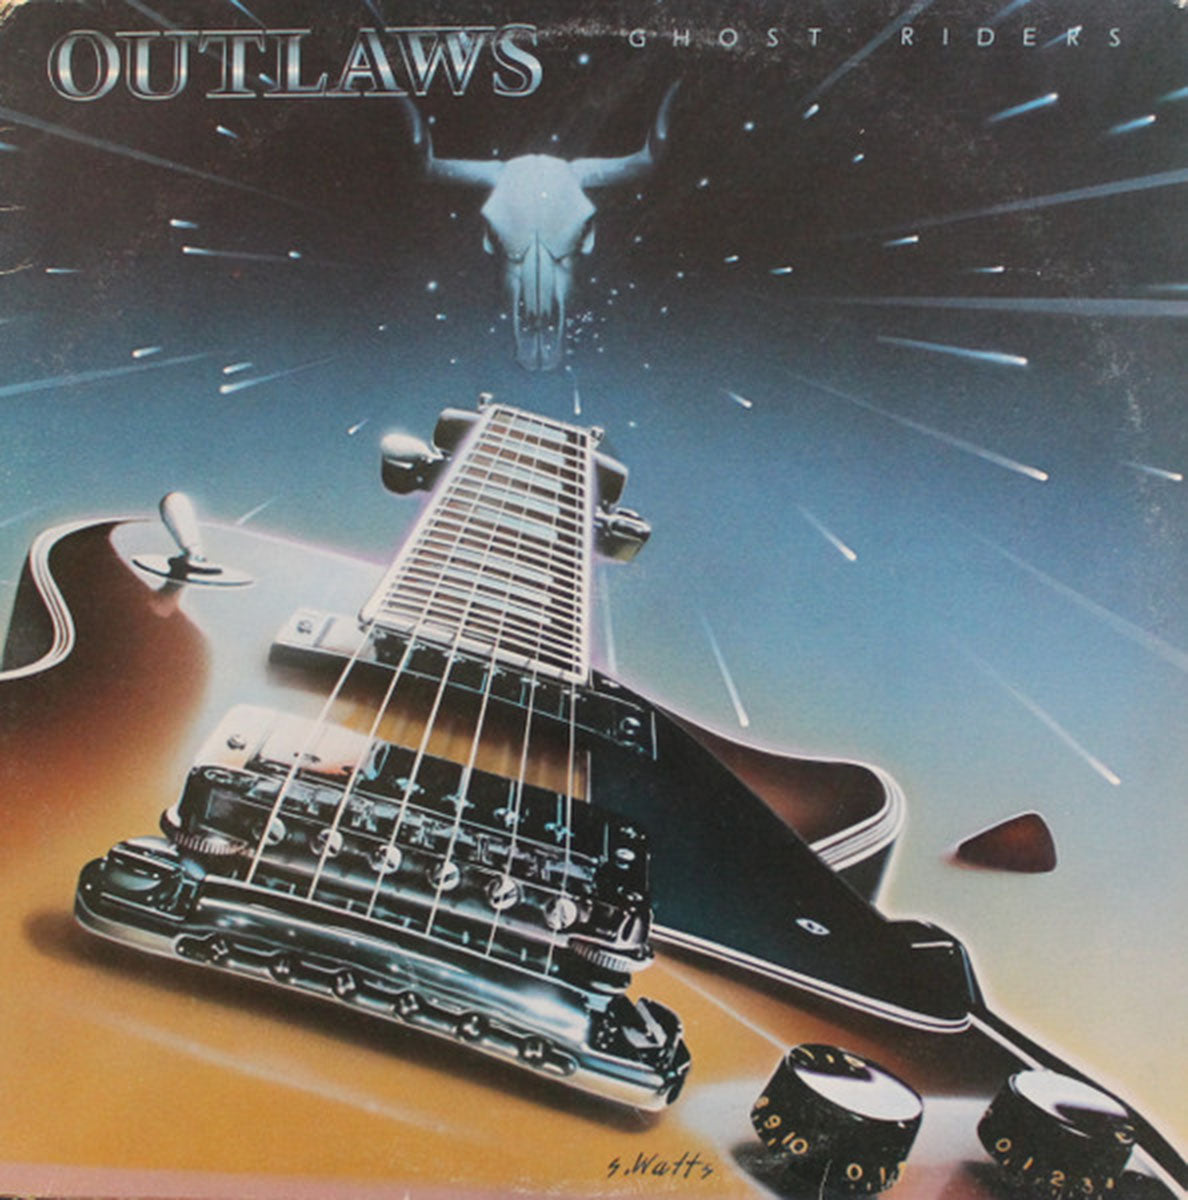 Outlaws – Ghost Riders